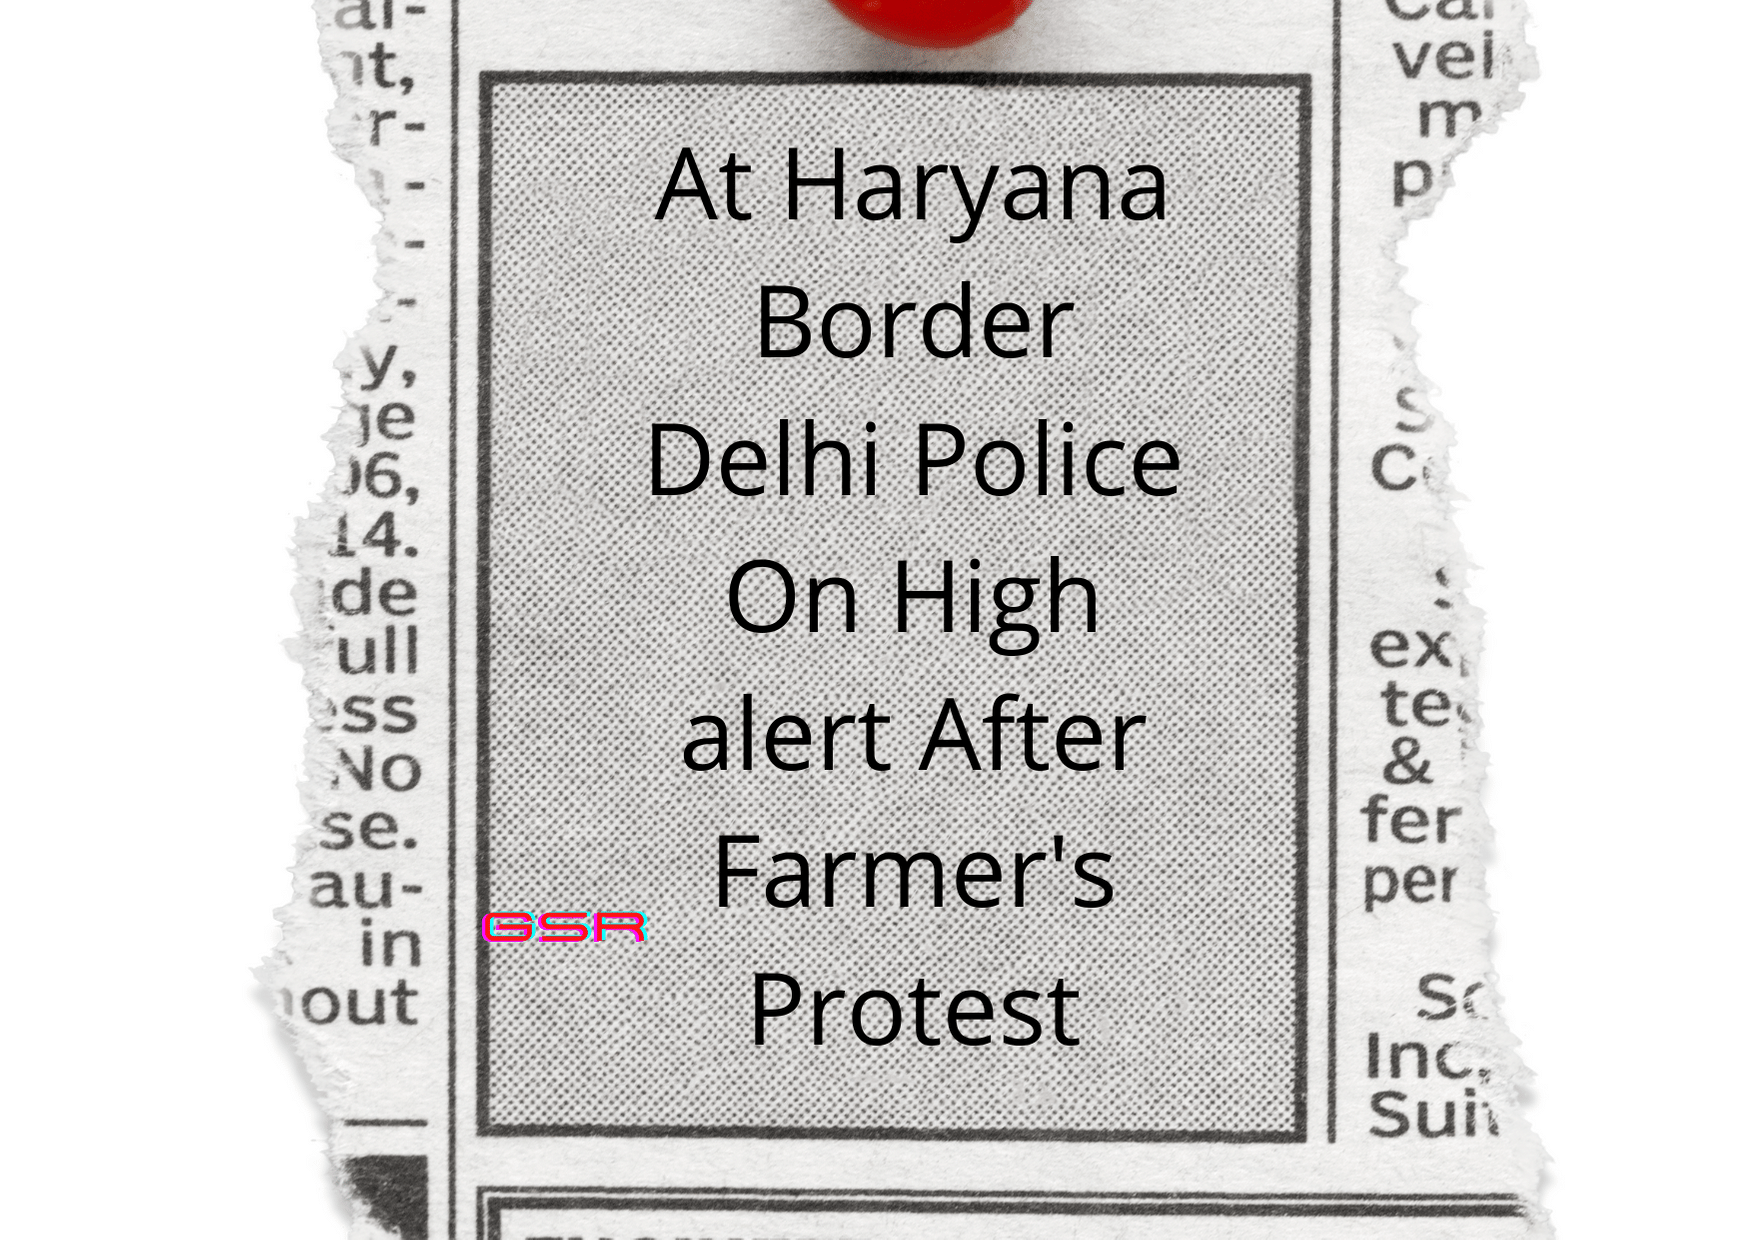 At Haryana Border Delhi Police On High alert After Farmer's Protest At Haryana Border Delhi Police On High alert After Farmer's Protest Delhi Police on high alert after the farmer protest on the national capital on agriculture sector reforms. The Ashok Nagar - Ghazipur and the Delhi Haryana border forces are on high alert. A slogan and the protest raised against the Centre's reforms, On Saturday, Farmers, and Arhtiyas (commission agents) in Rohtak. He demanded that his outbreak would continue until the three bills were withdrawn.